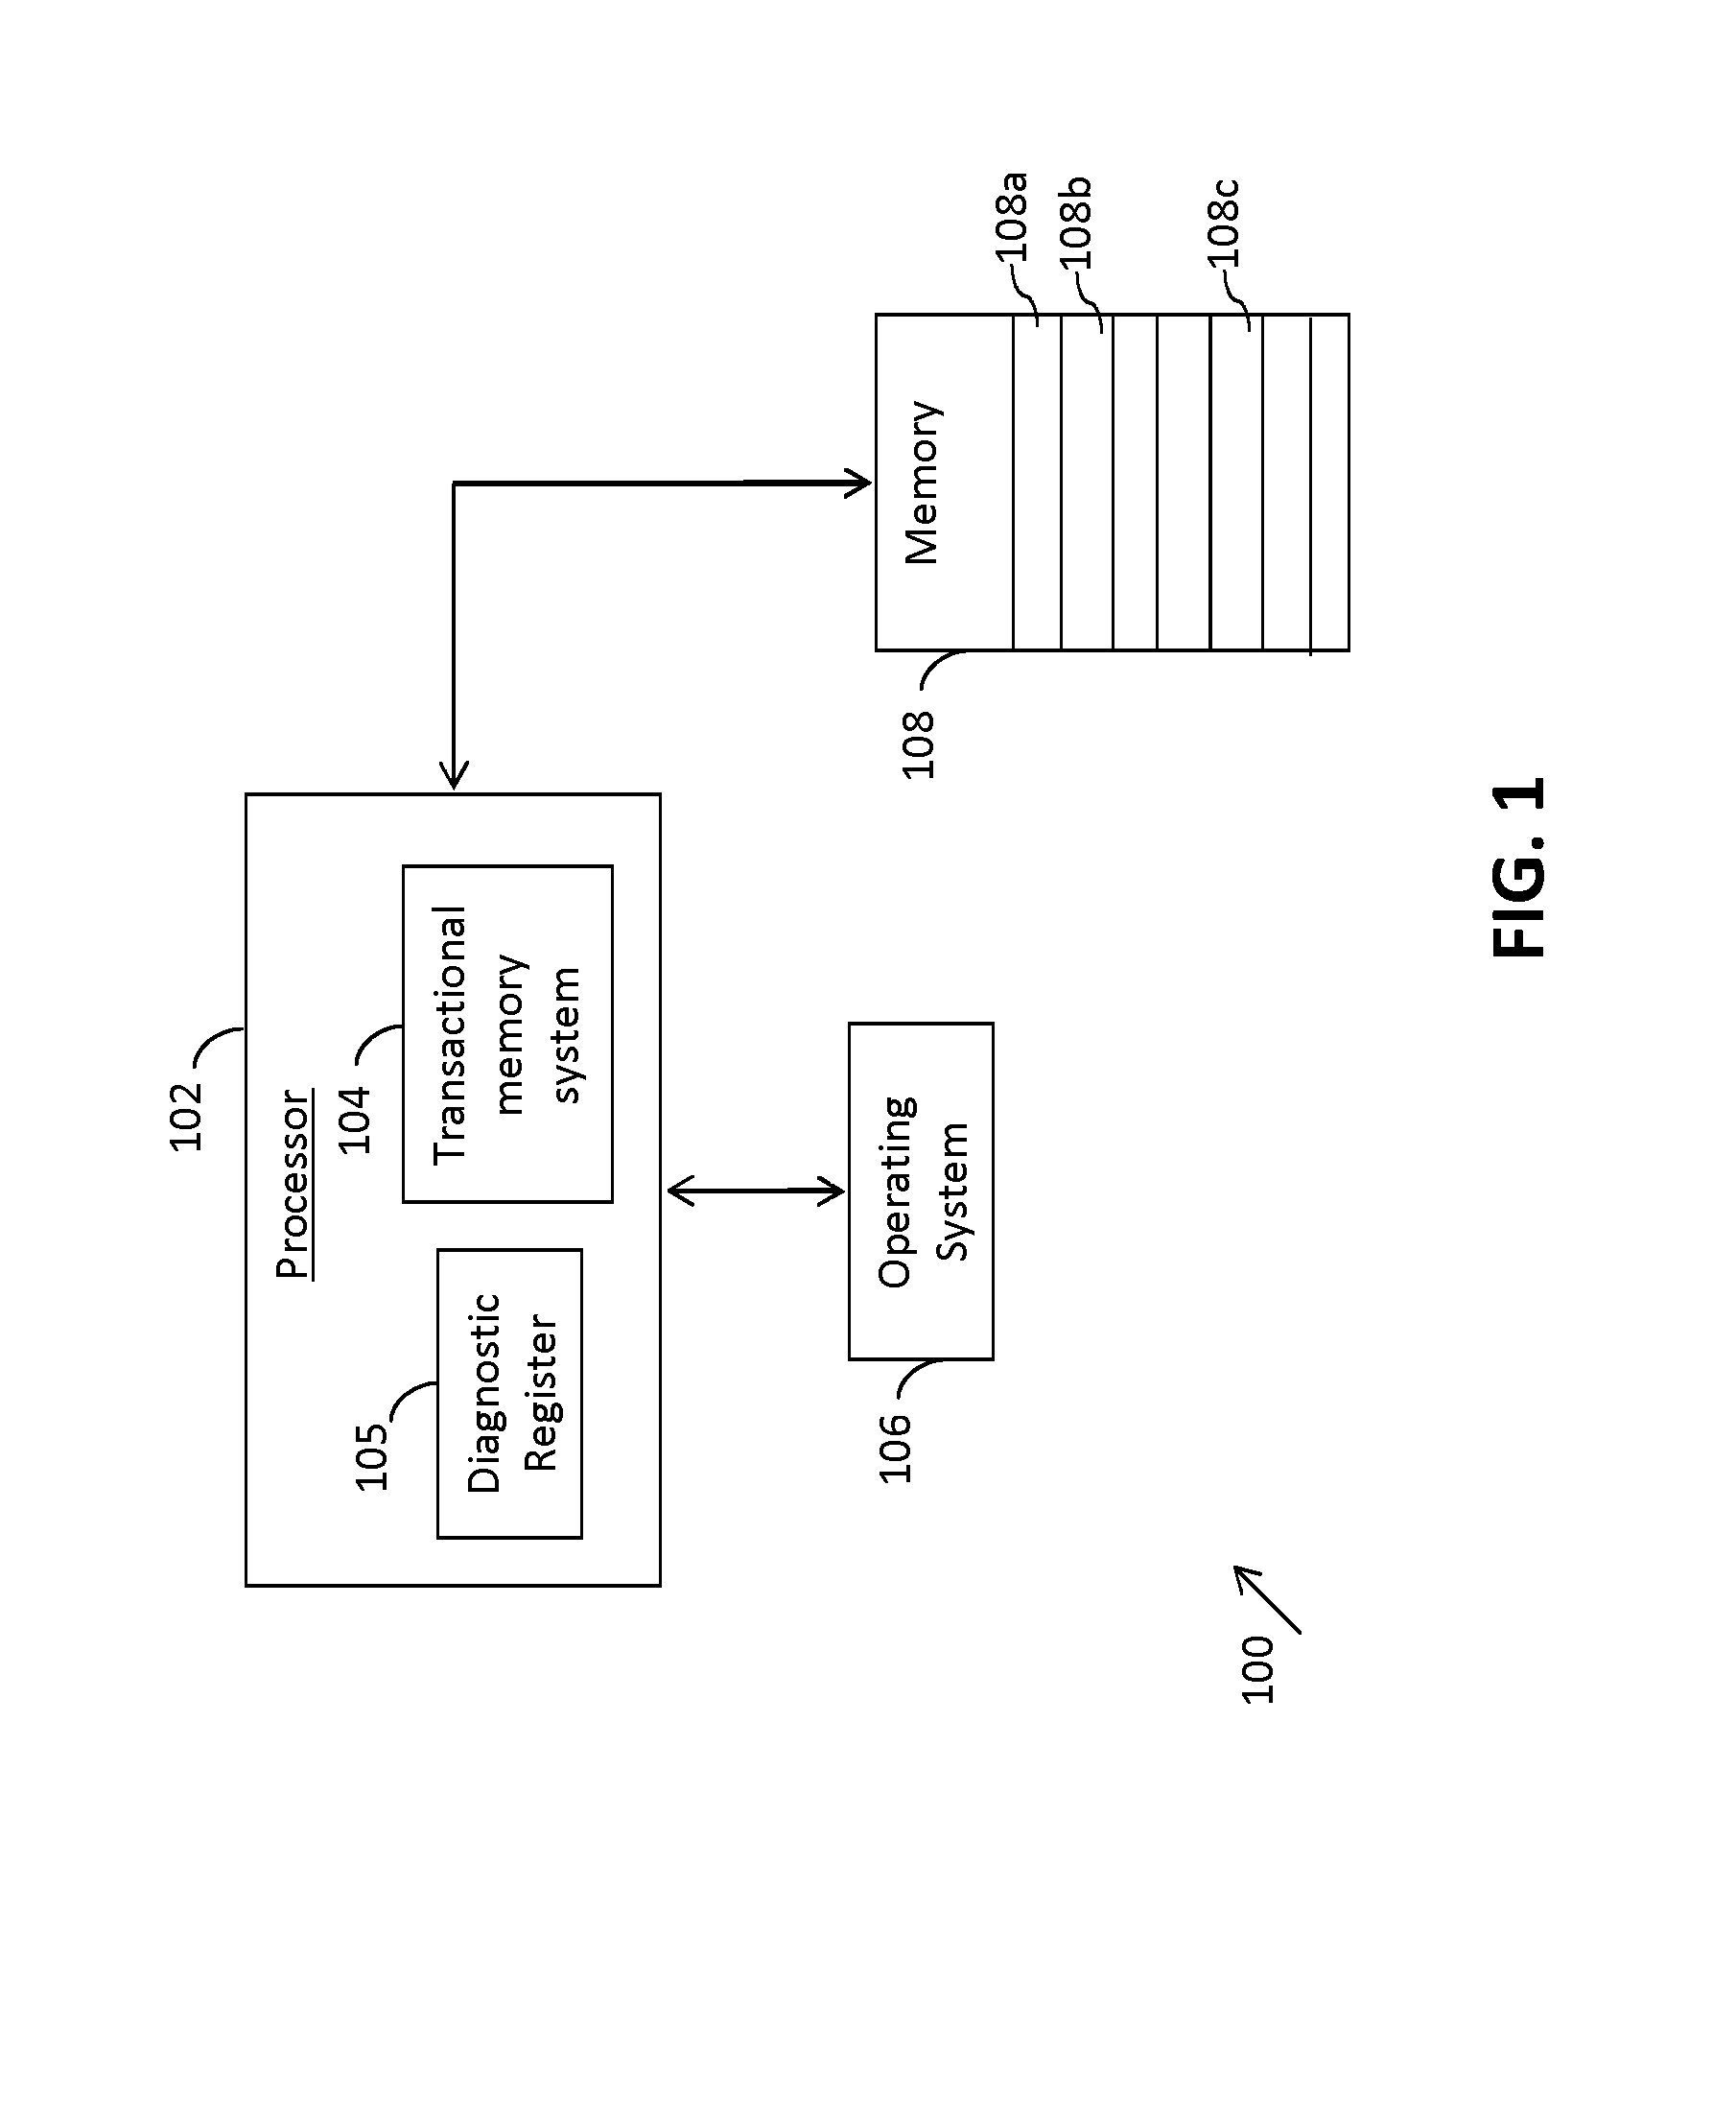 Method and apparatus for conditional transaction abort and precise abort handling